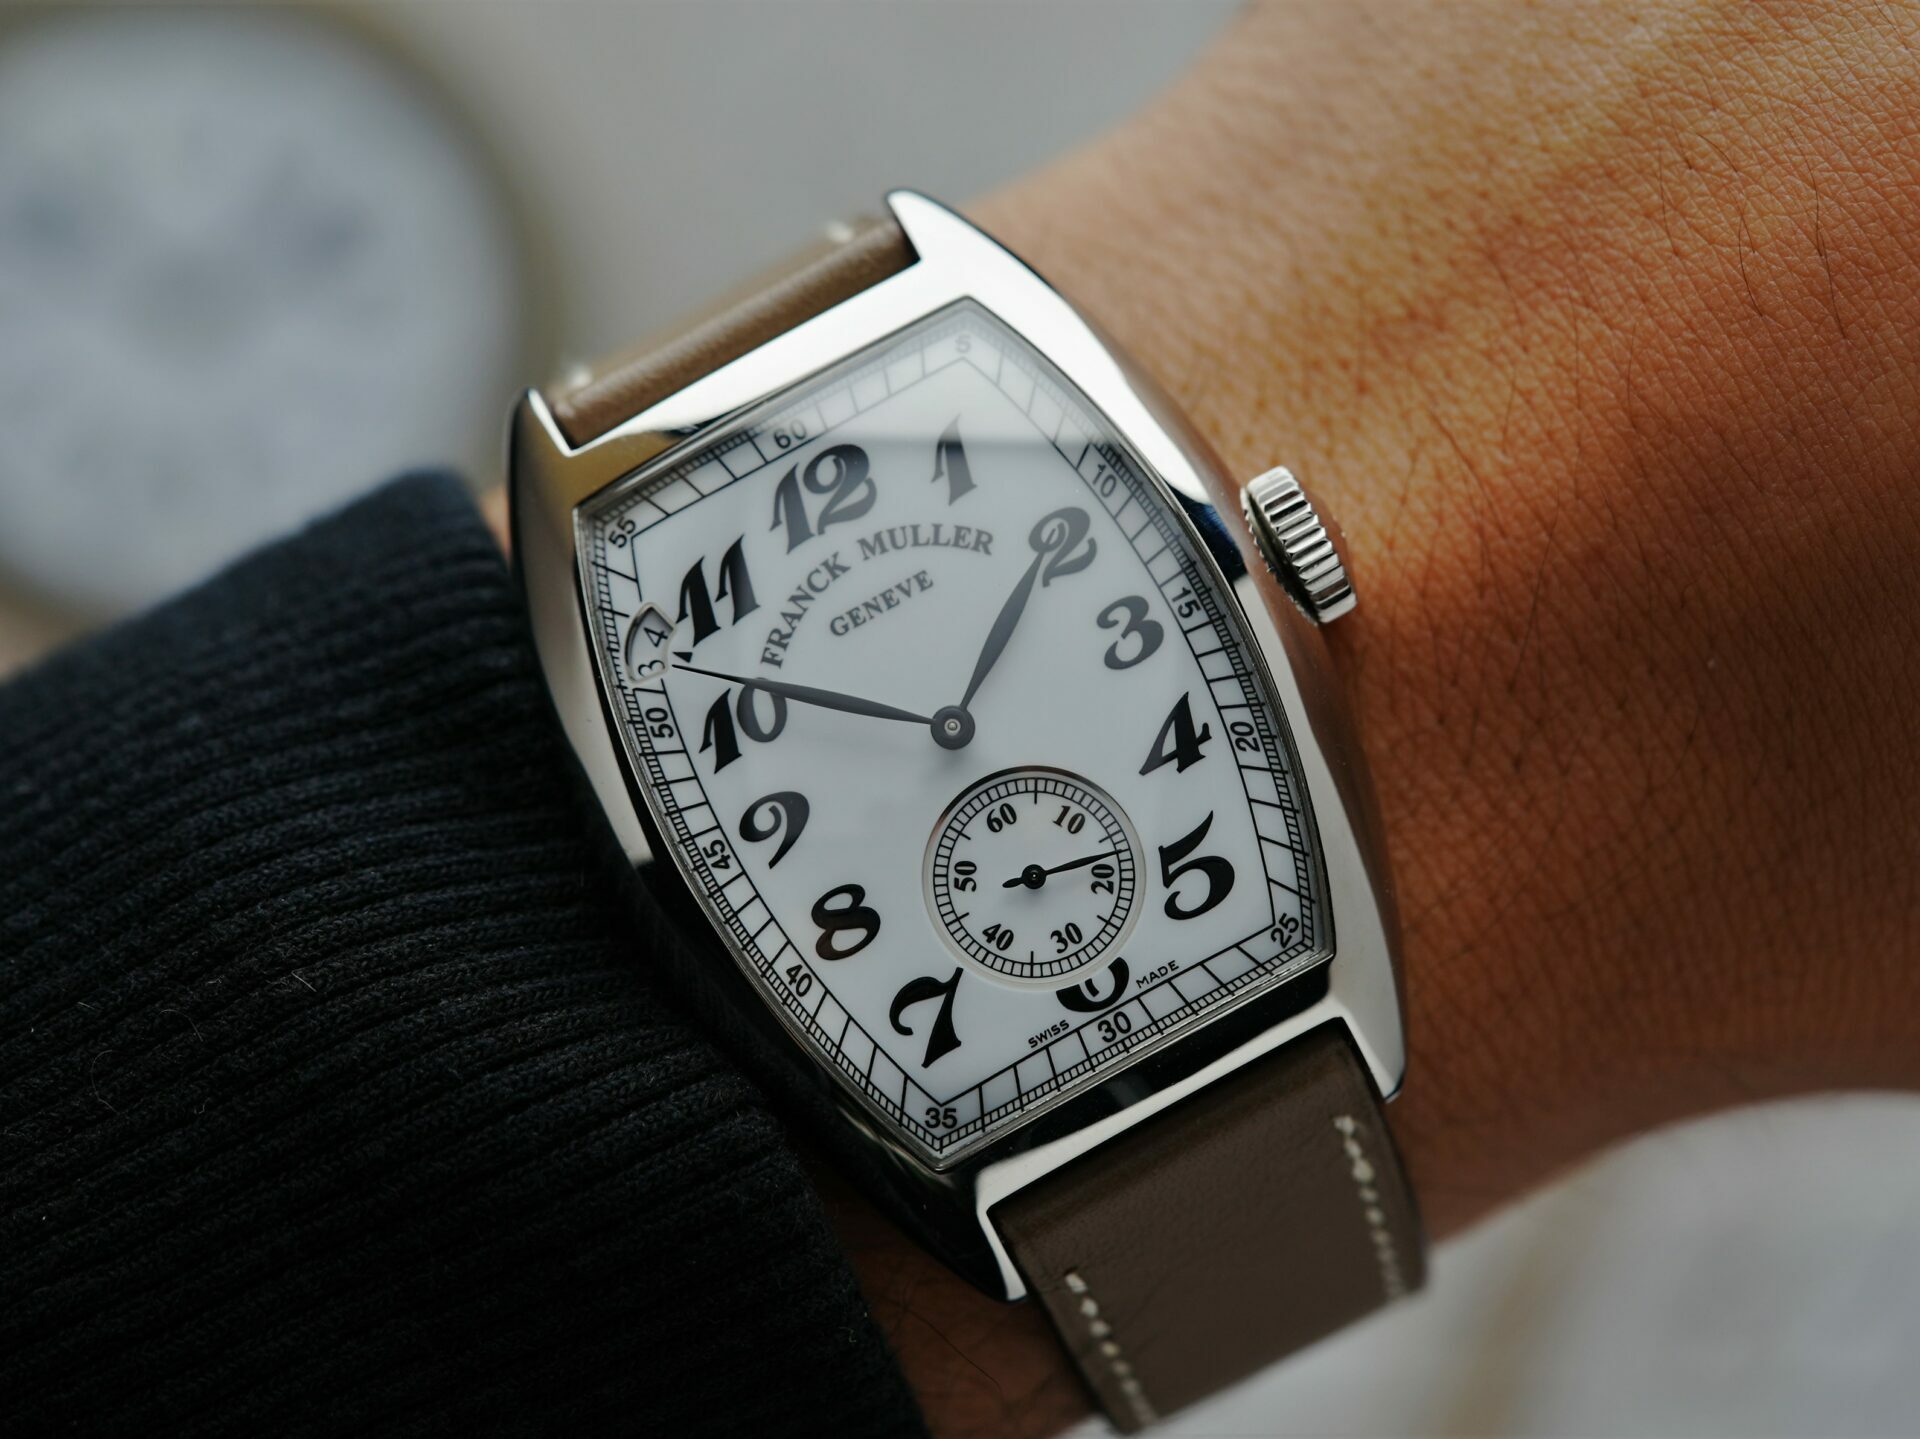 Franck Muller Vintage Curvex 7 Day Reserve watch being featured on wrist.